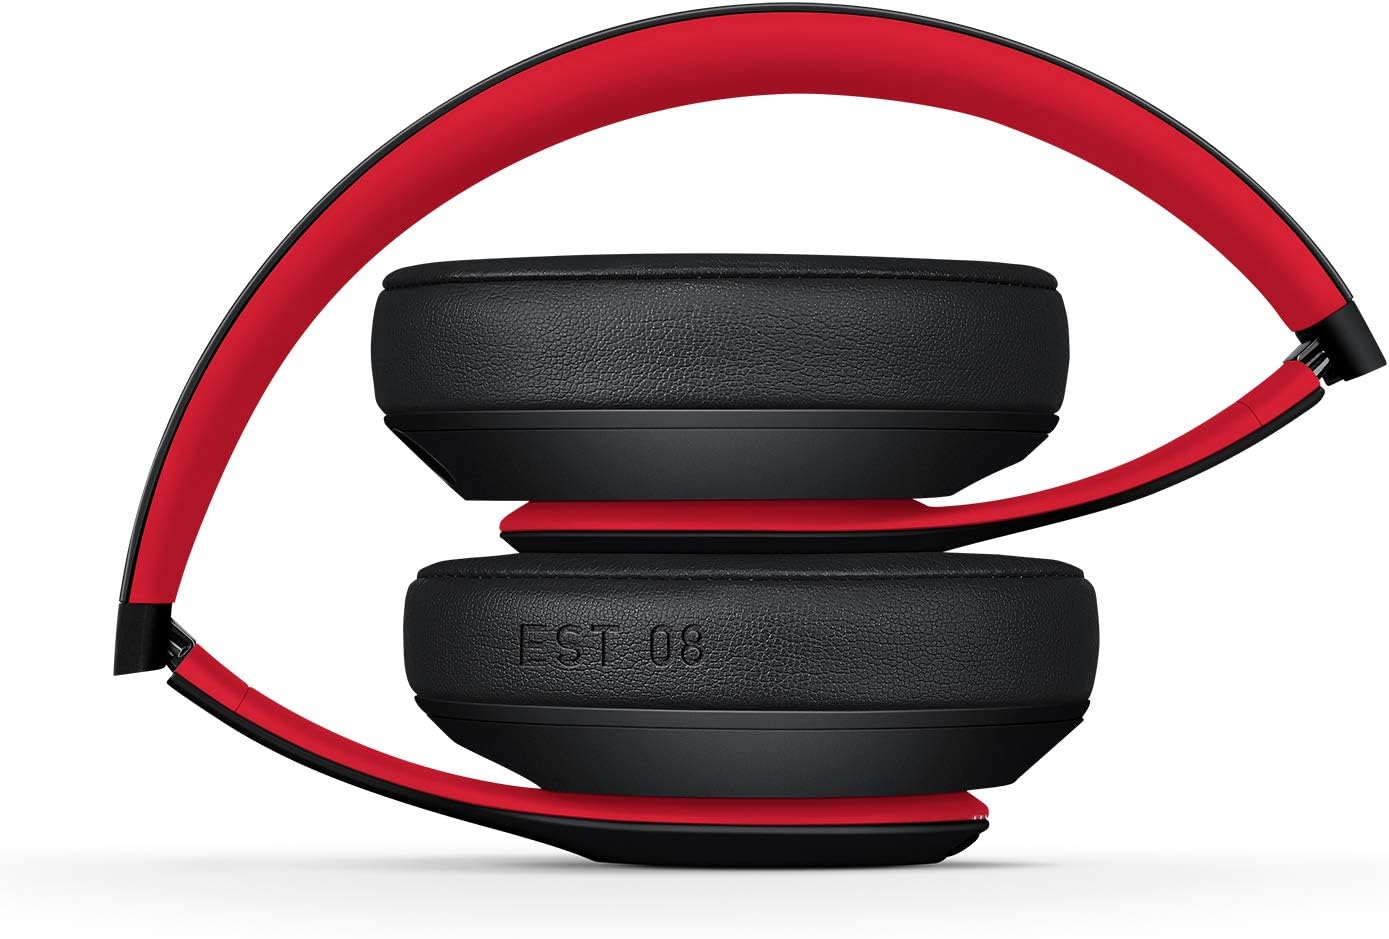 Beats Studio3 Wireless Noise Cancelling Over-Ear Headphones - Apple W1 Headphone Chip, Class 1 Bluetooth, 22 Hours of Listening Time, Built-in Microphone